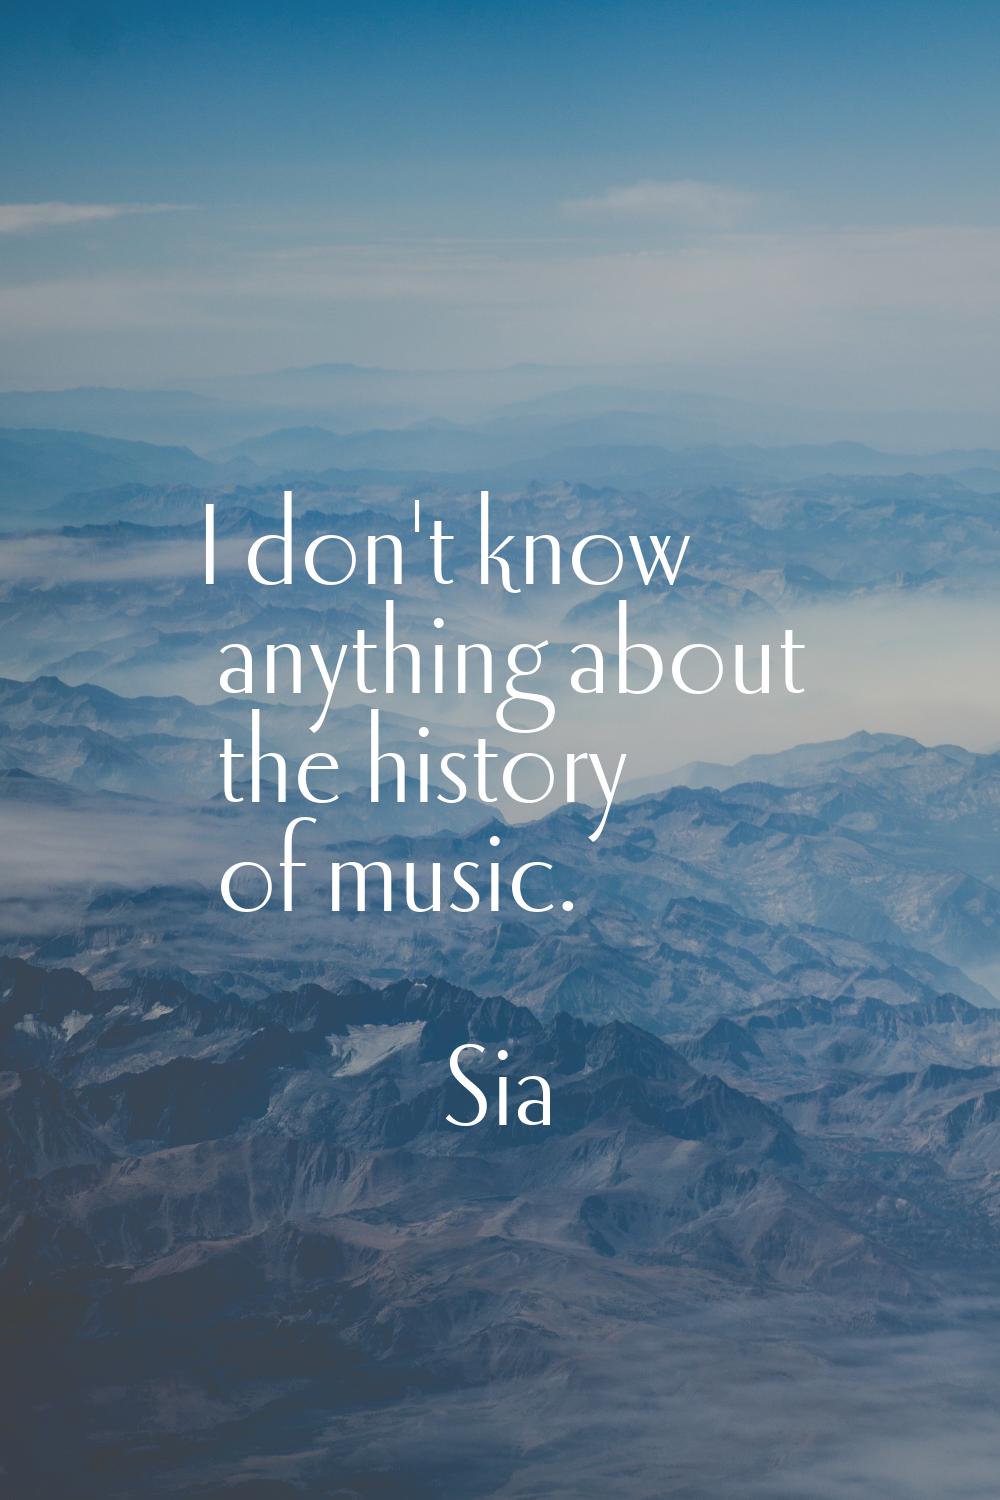 I don't know anything about the history of music.